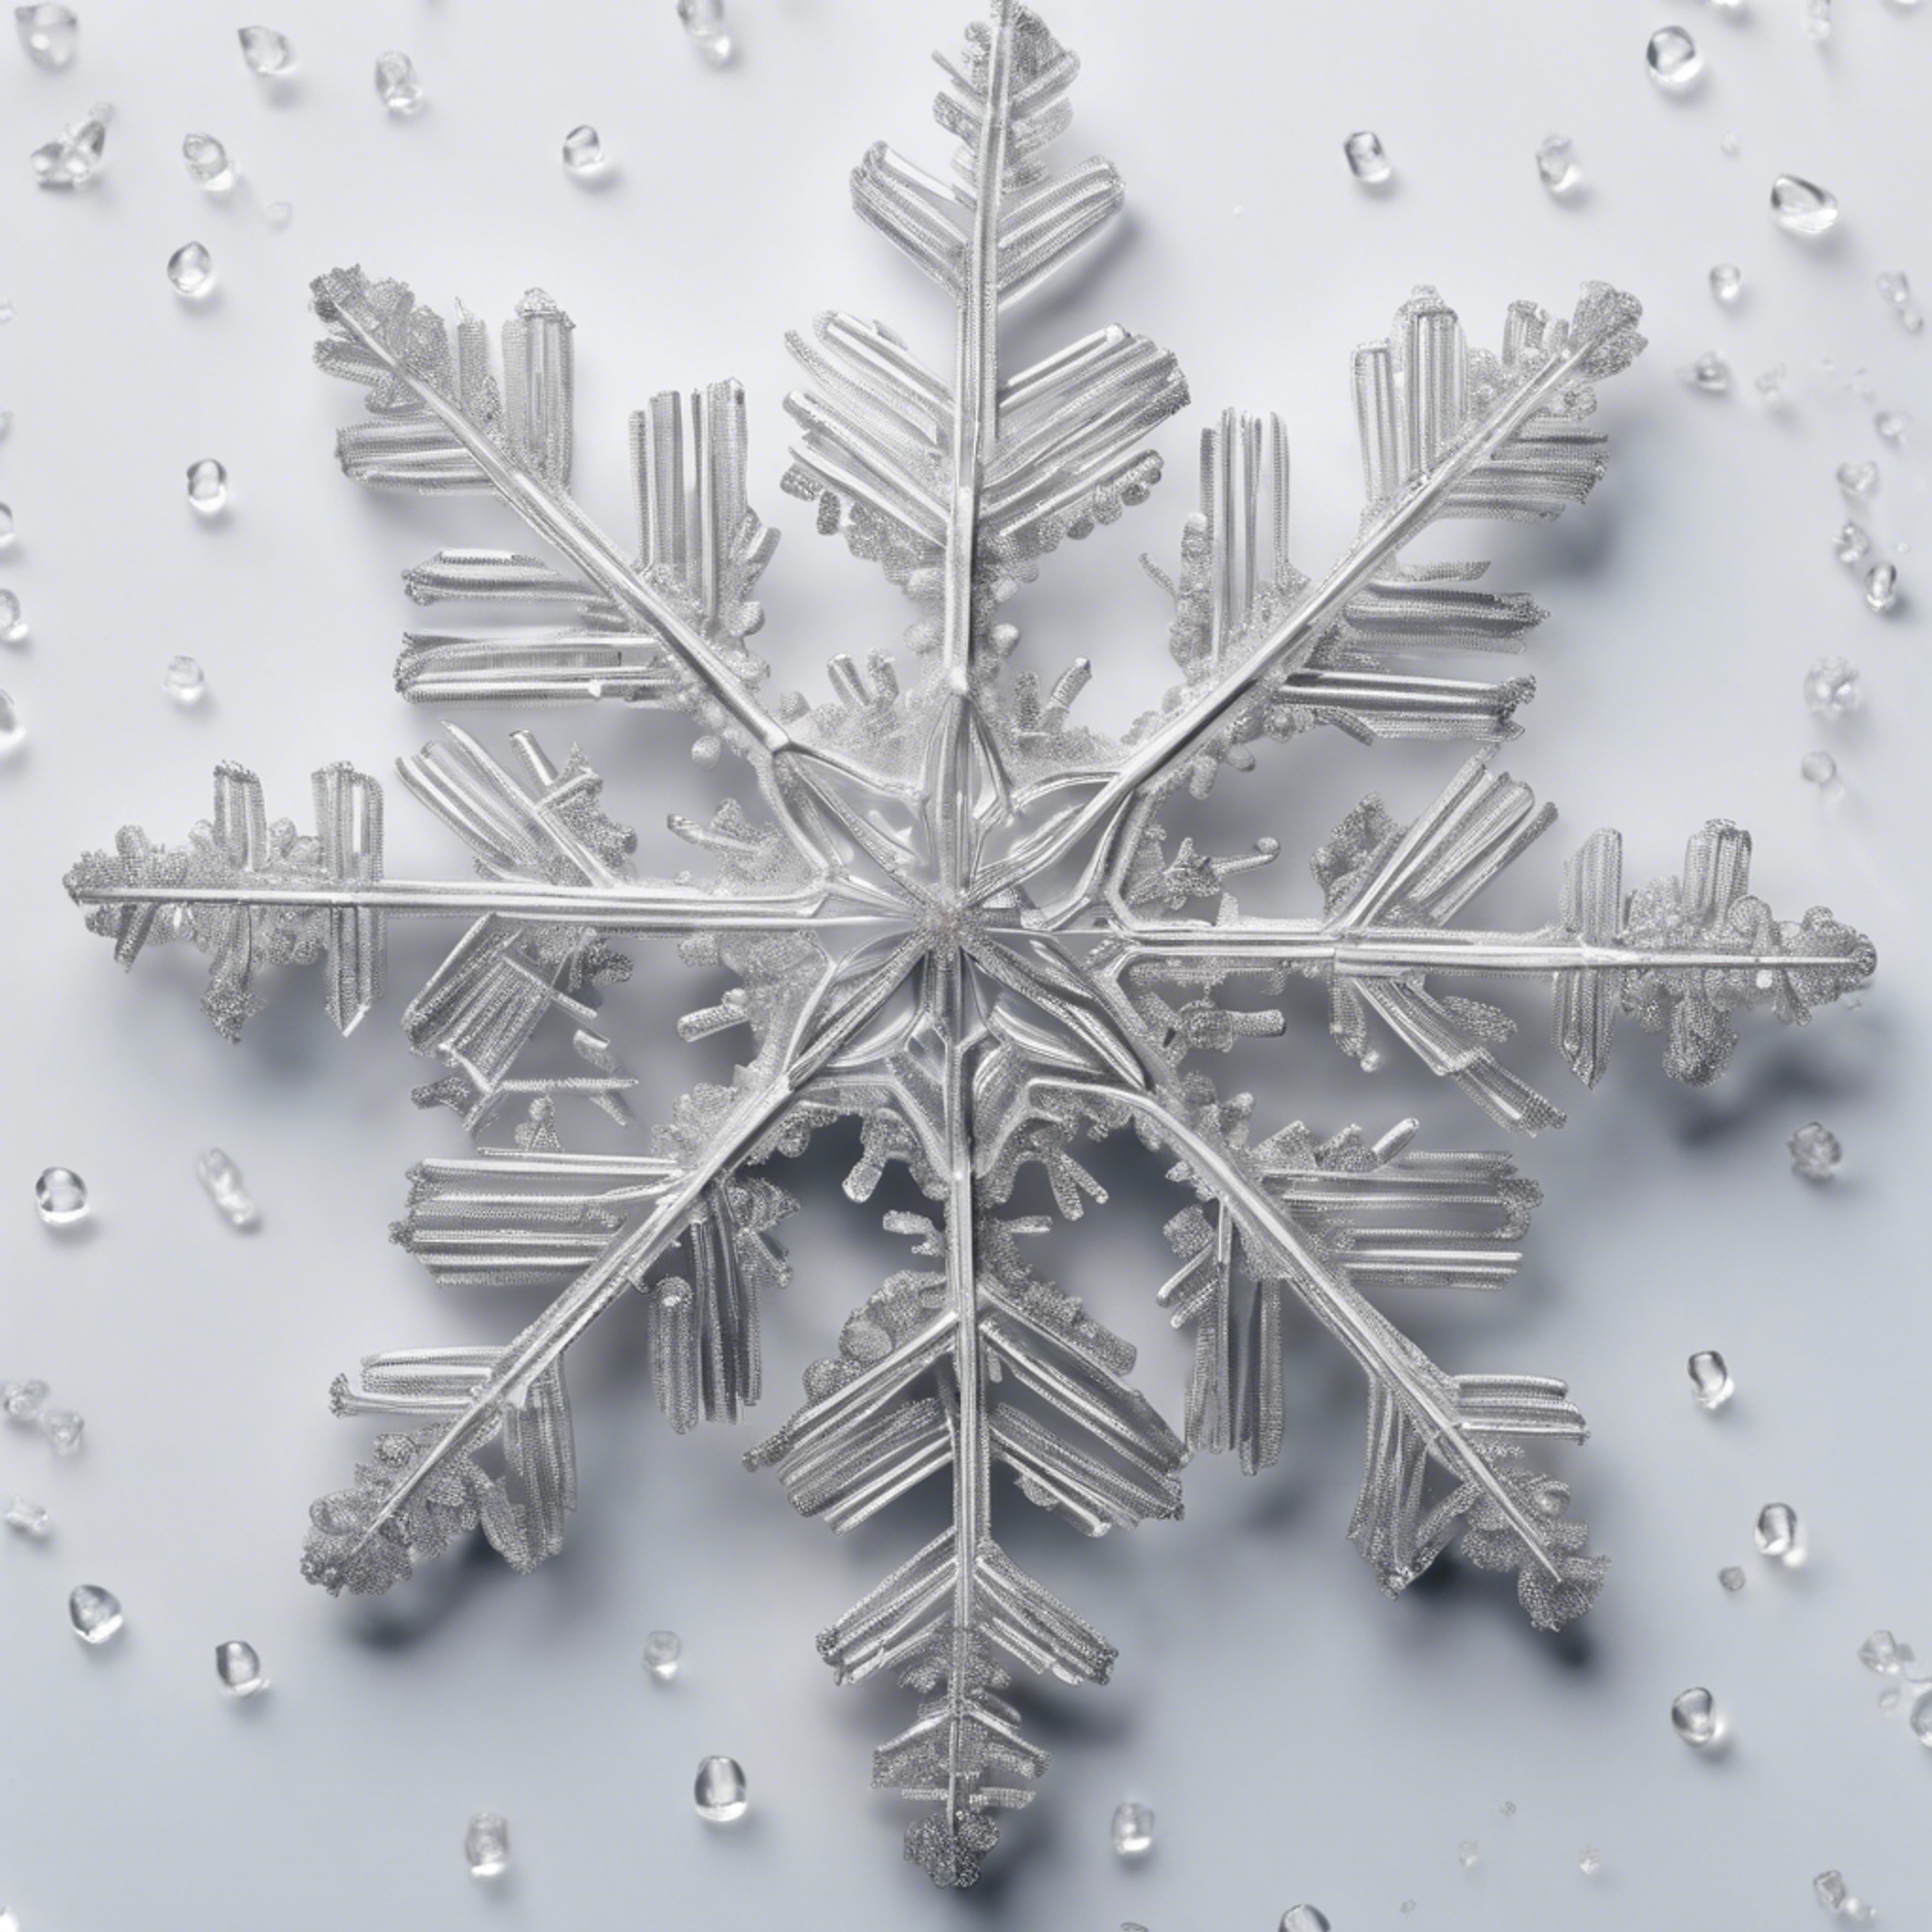 Close-up macro photography of a silver-white snowflake, intricate in detail, against a cool white background. Ταπετσαρία[e4635791b5a244959ce4]